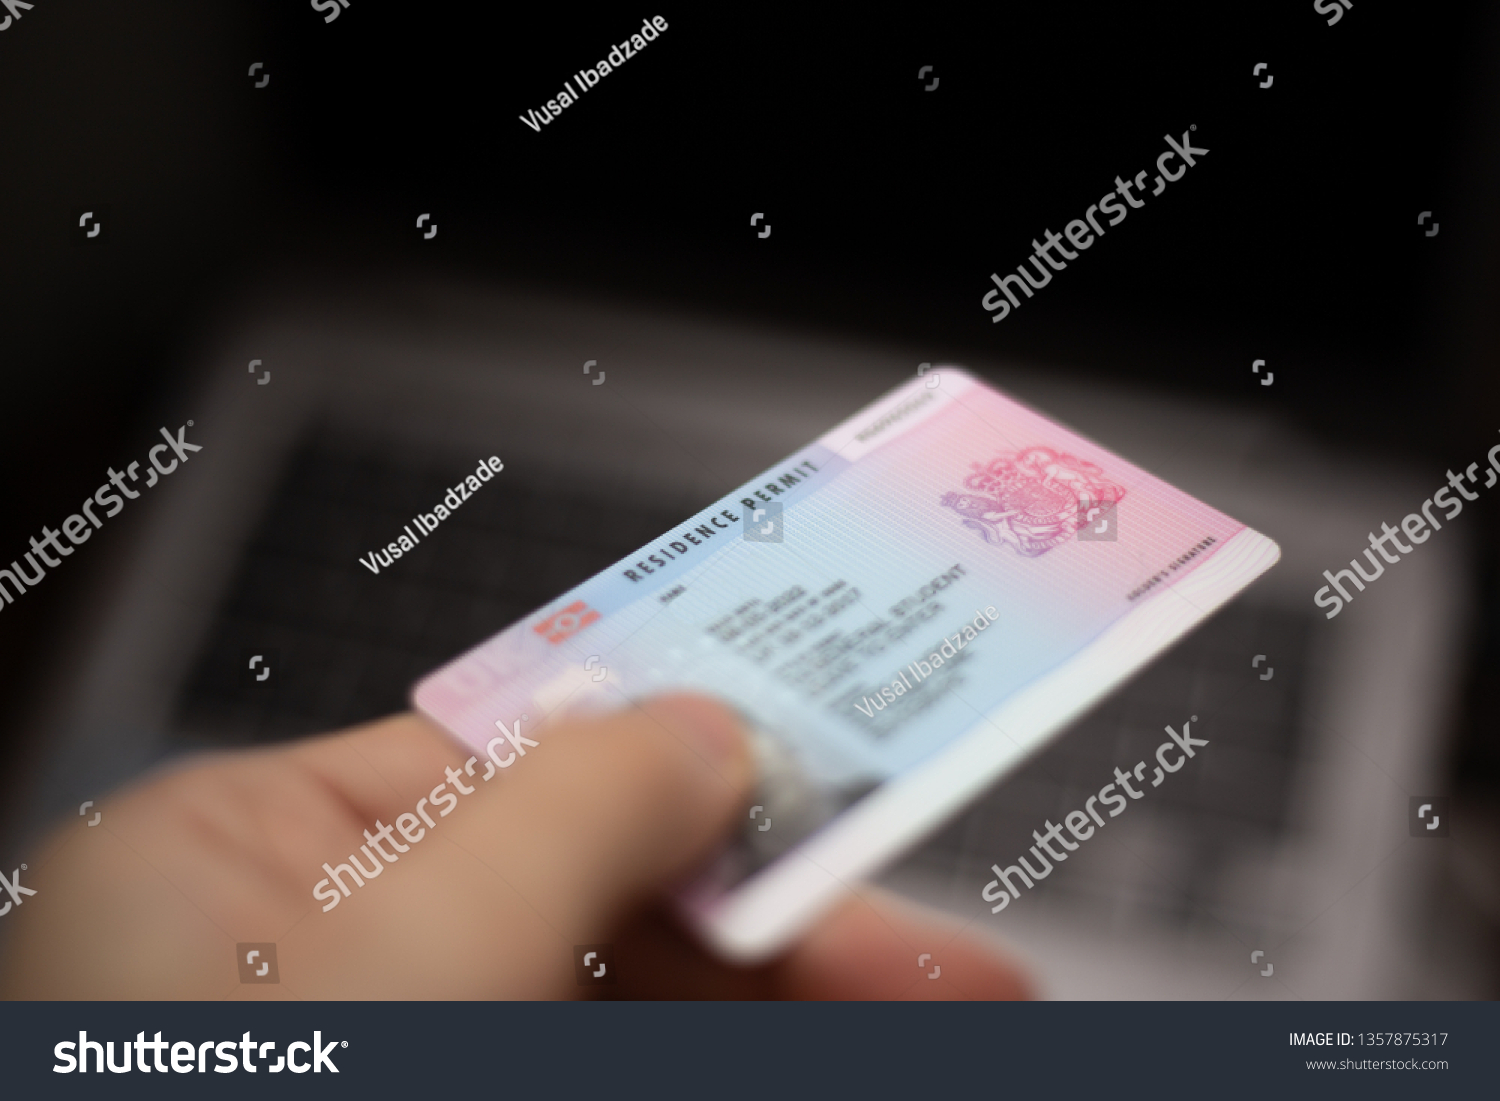 Person holds UK Residence Permit - BRP card in hand and computer in the background. Immigration concept image. 